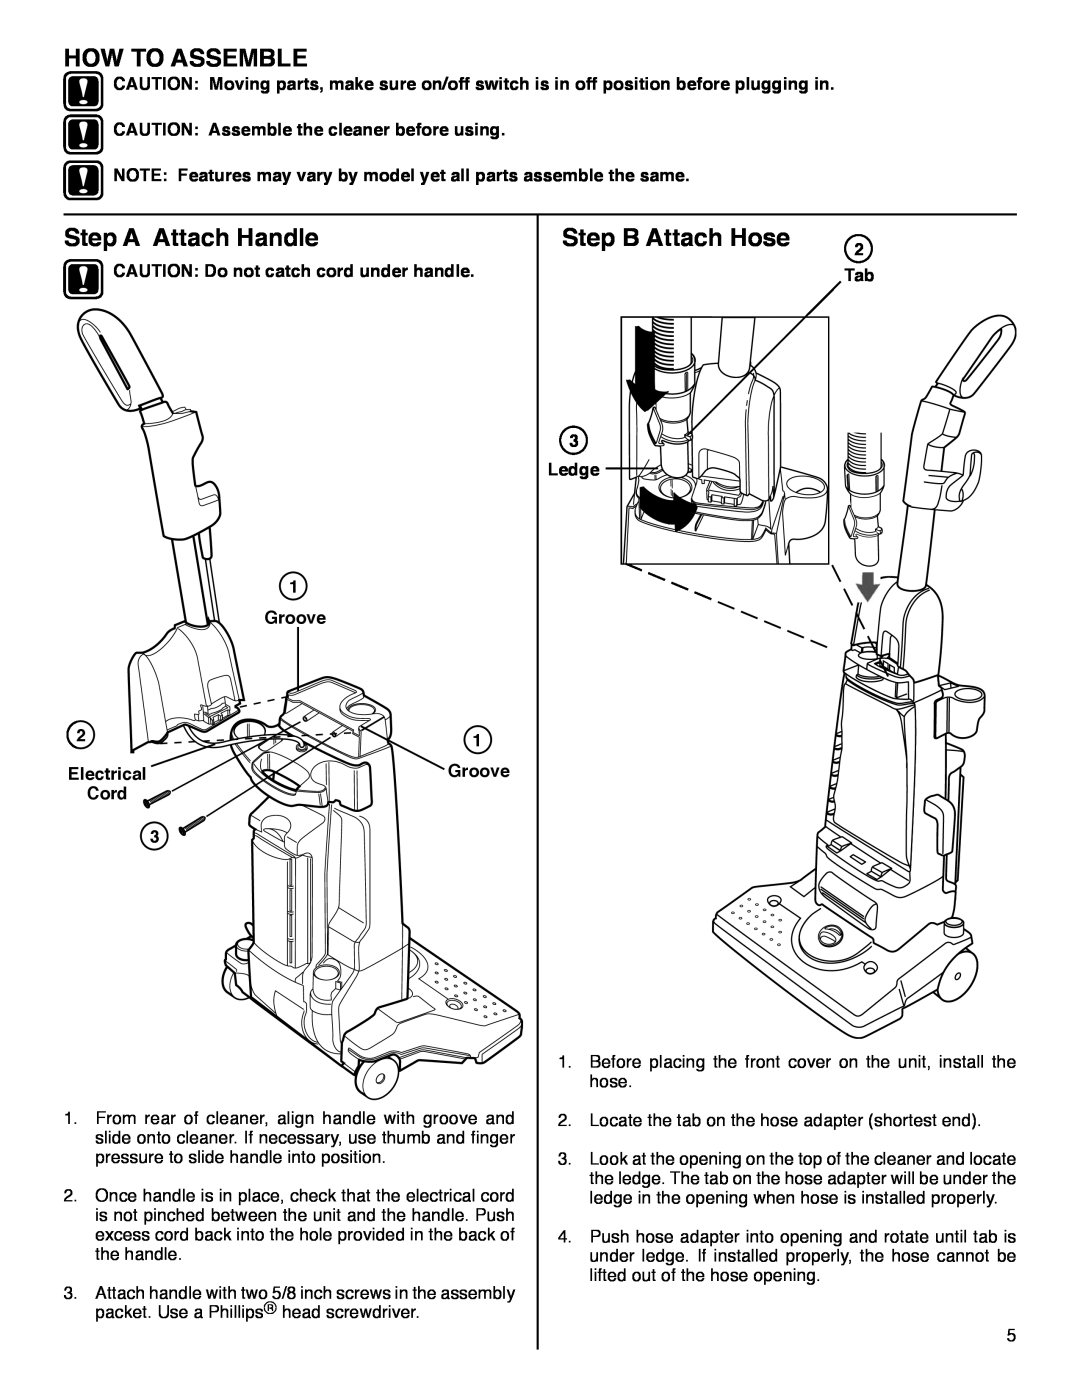 Eureka HD4570 How To Assemble, Step A Attach Handle, Step B Attach Hose, CAUTION Do not catch cord under handle 1 Groove 